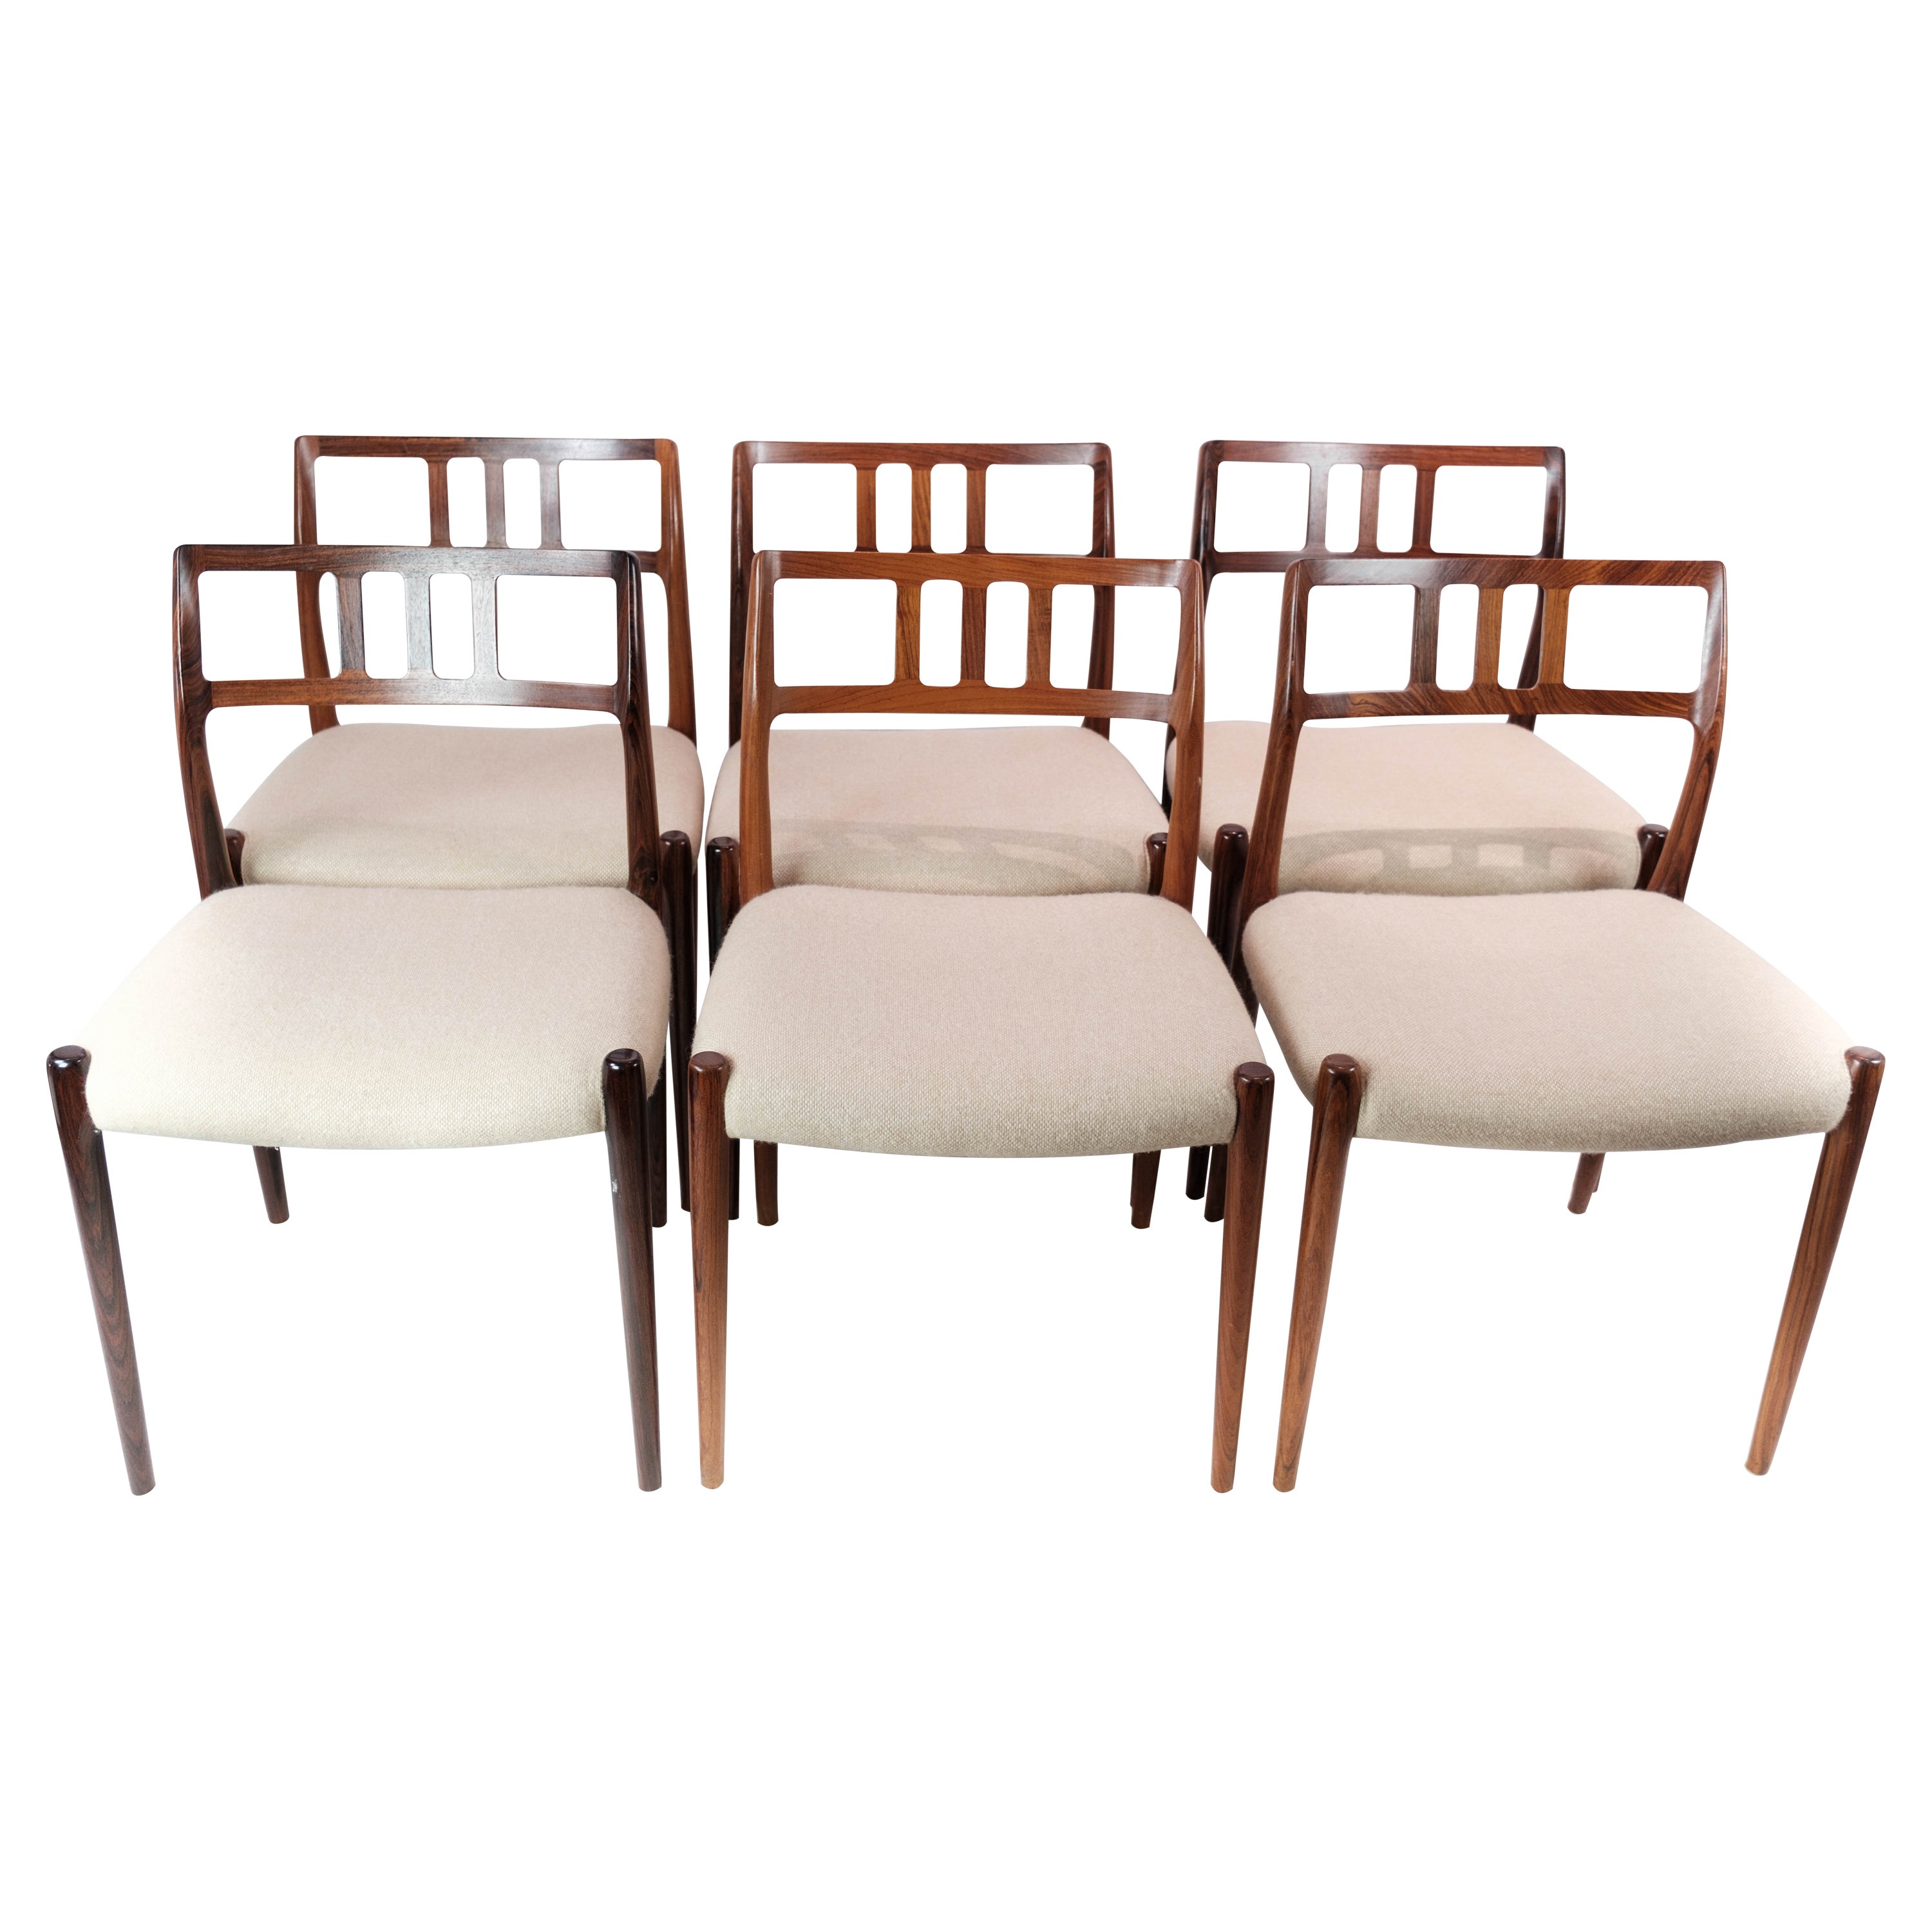 Set of Six Dining Room Chairs, Model 79, Designed by N.O. Moeller, 1960s